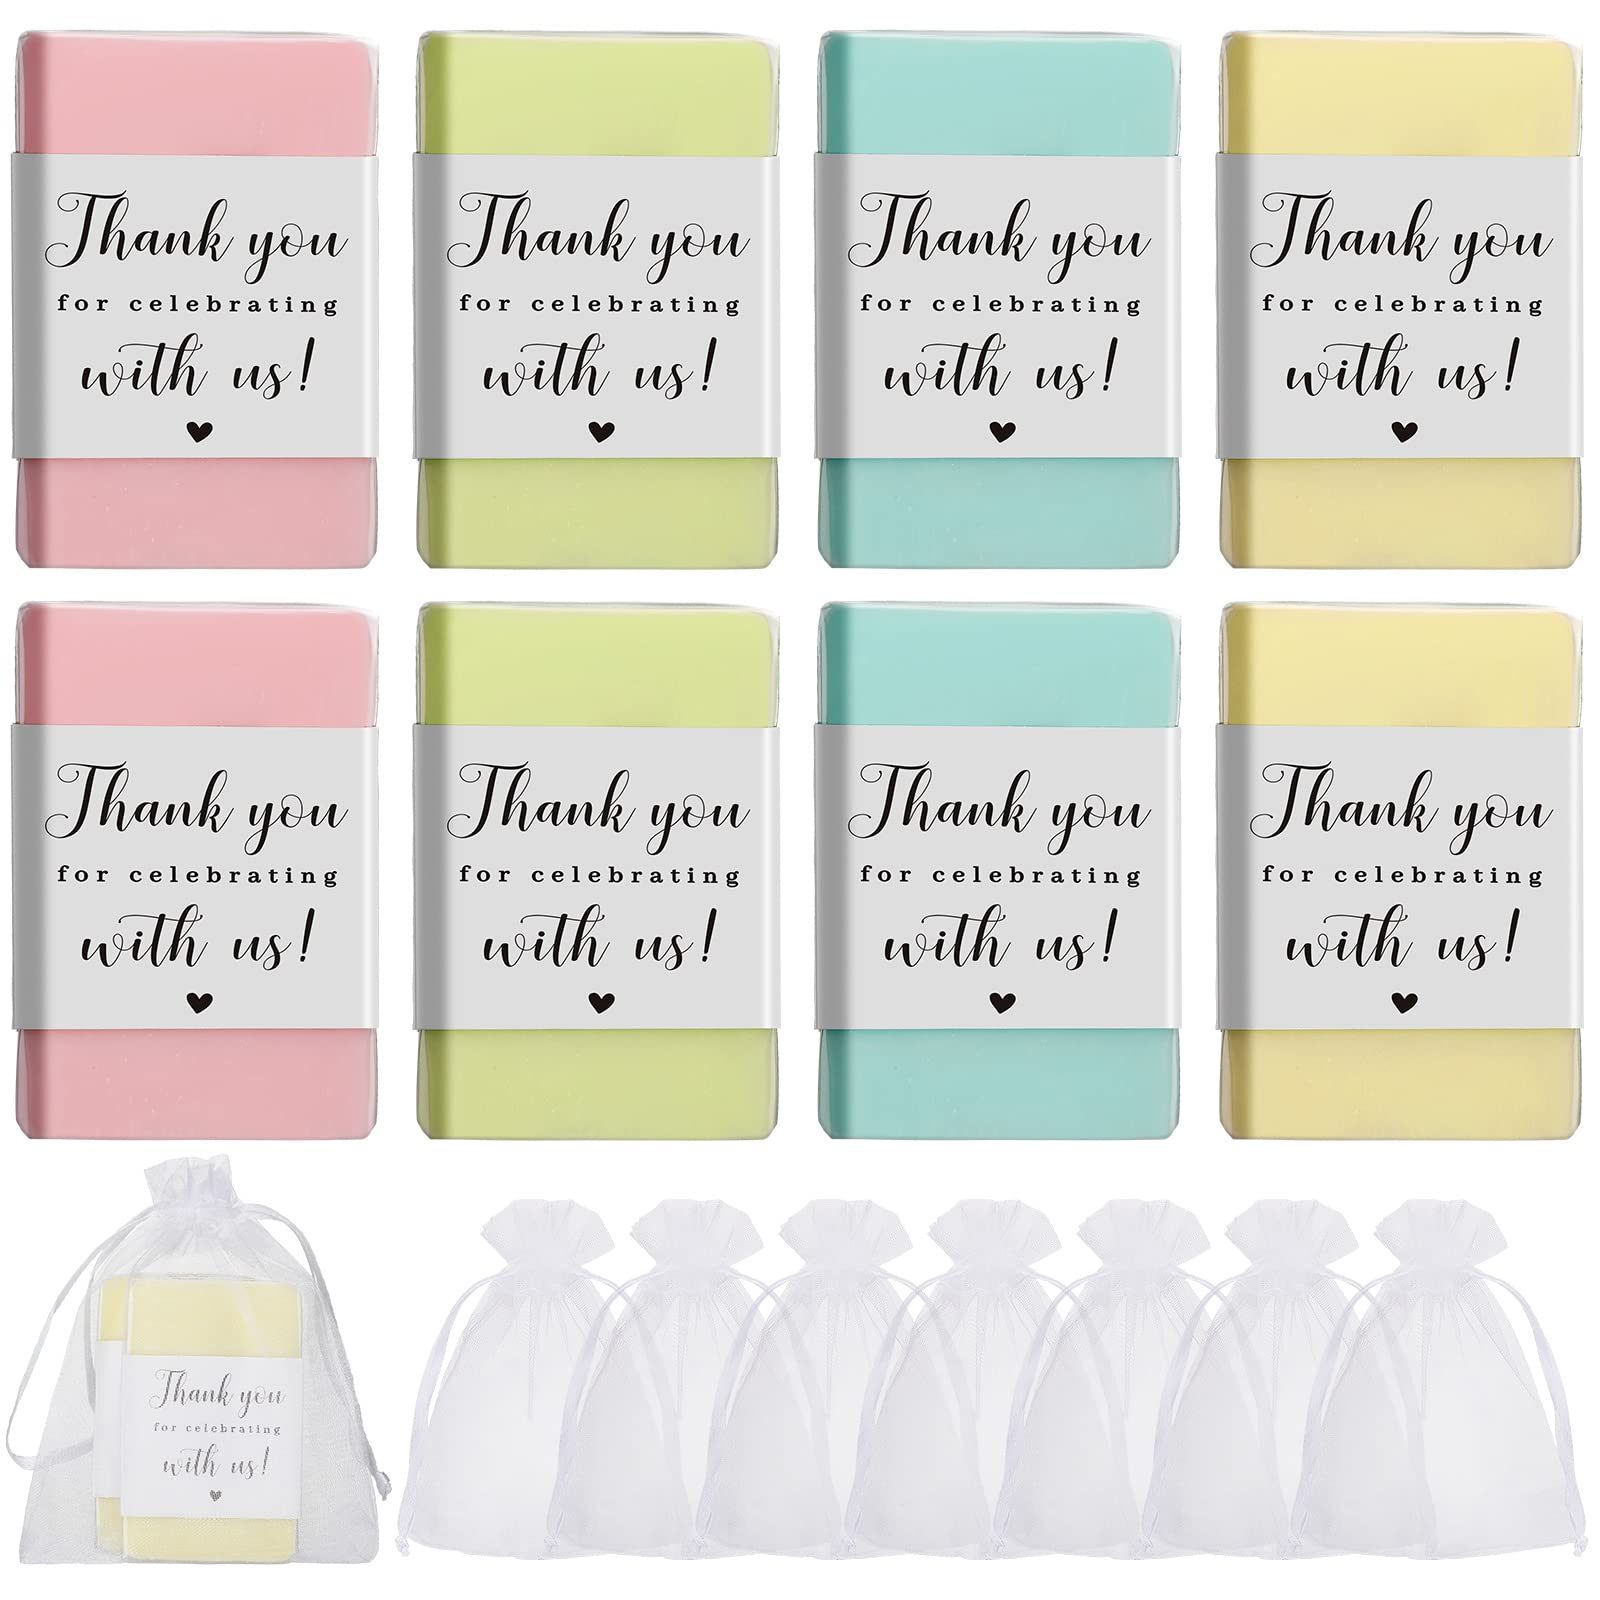 60 Set Mini Soap Favors Gift Small Scented Soap Bar Cleanser for Hands Body Gentle Skin Moisturizing Bath Soaps with White Sheer Organza Gift Bags for Baby Shower Bridal Shower Wedding (Classic)